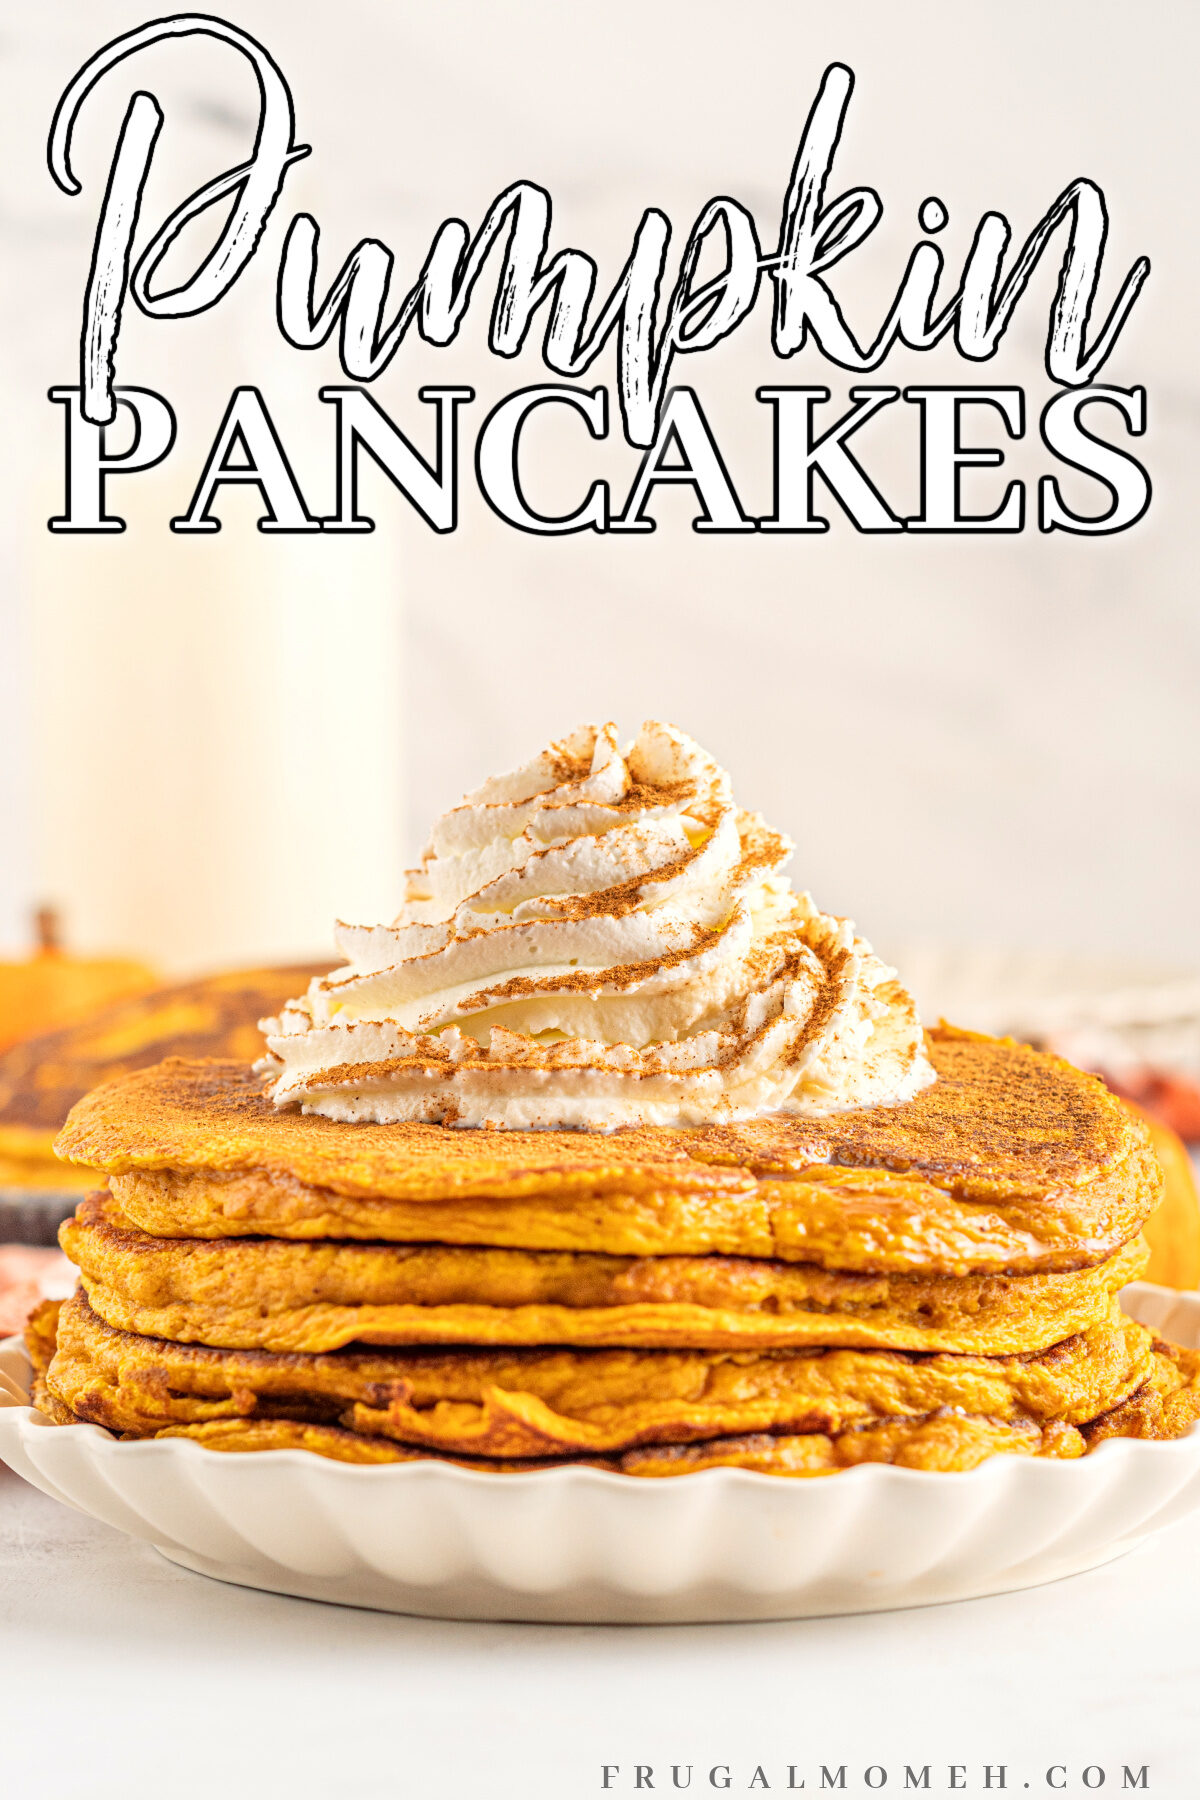 This easy pumpkin pancakes recipe uses real pumpkin, and has the perfect blend of warming spices for a delicious fall brunch or breakfast.